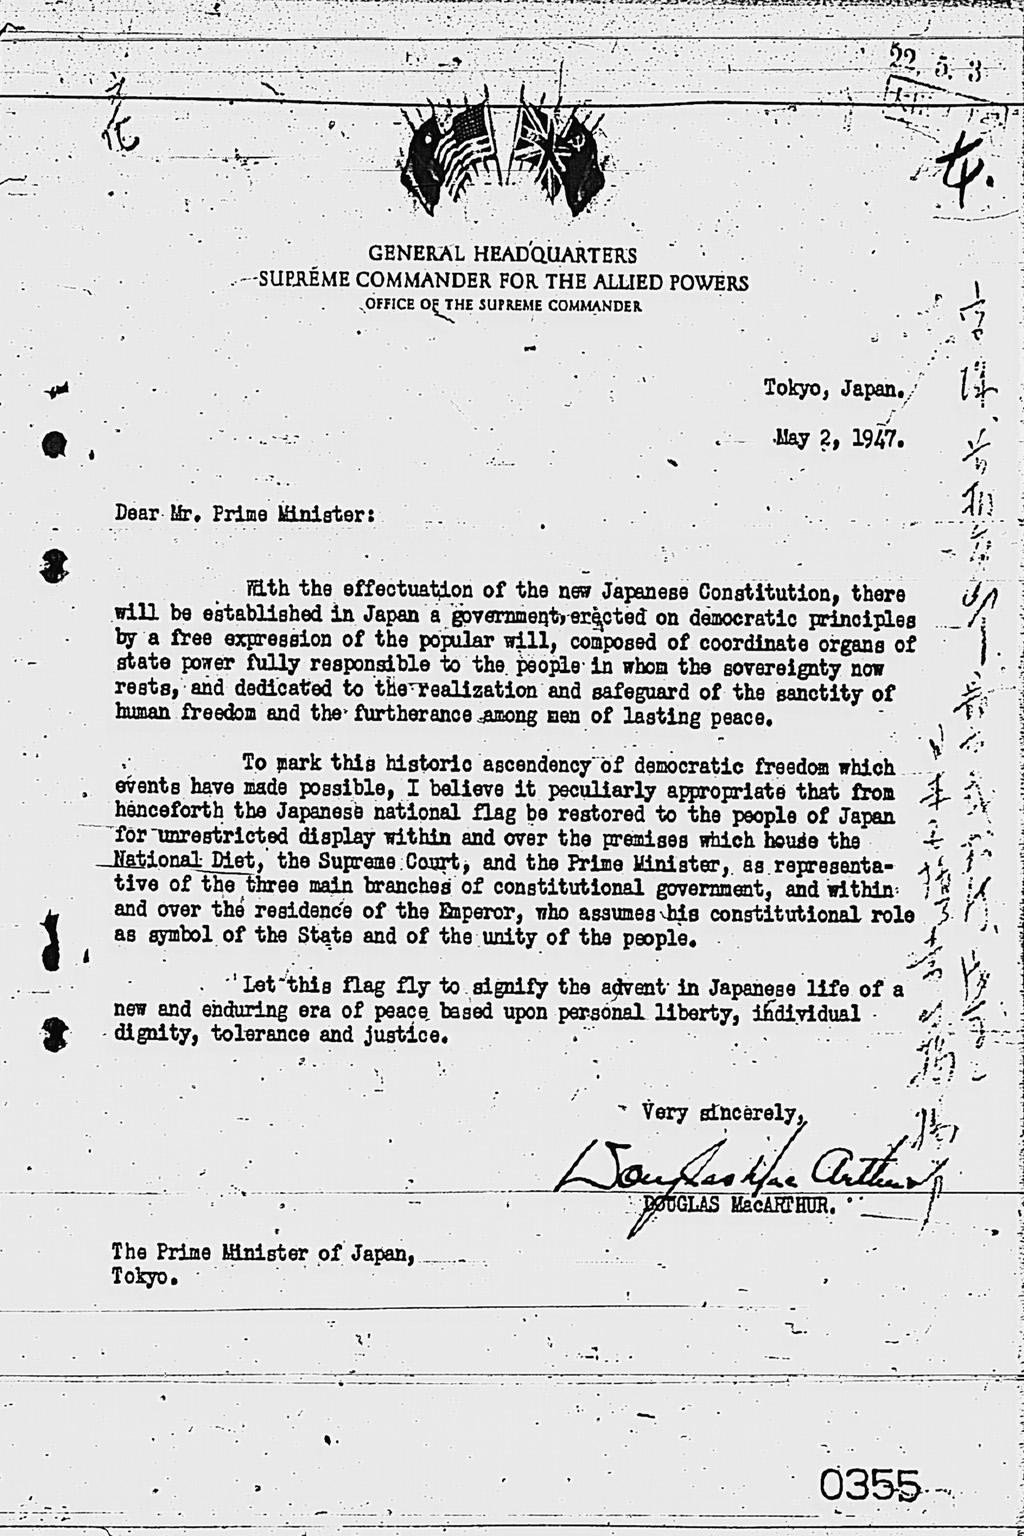 [Letter from Douglas MacArthur to Prime Minister dated May 2, 1947](Larger image)